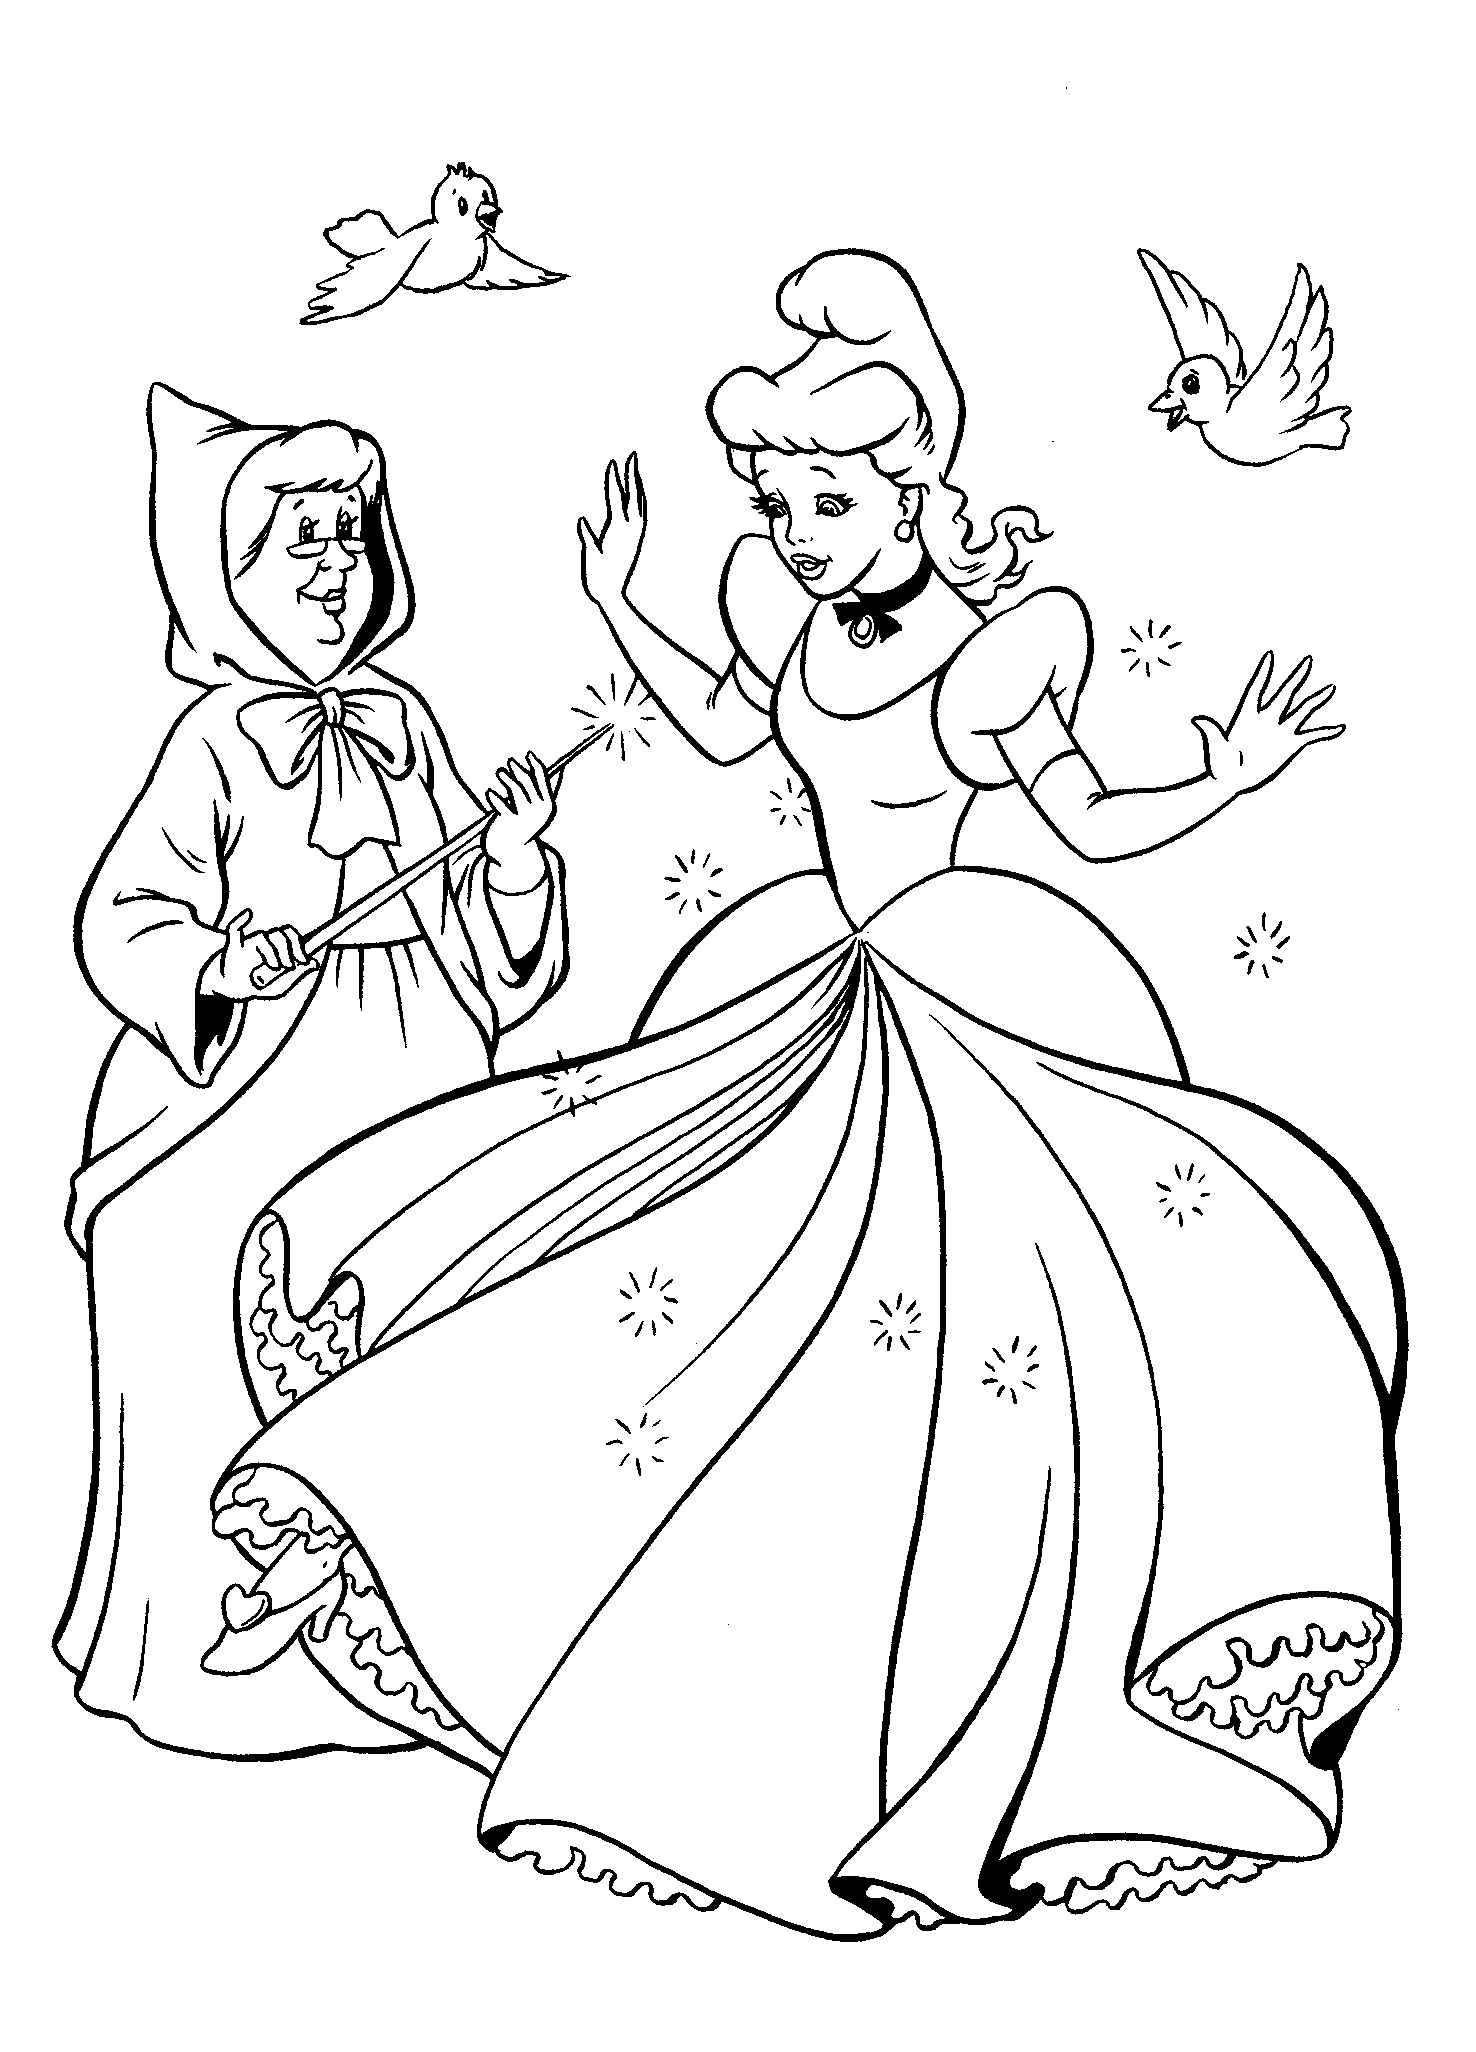 Coloring page - New Cinderella dress